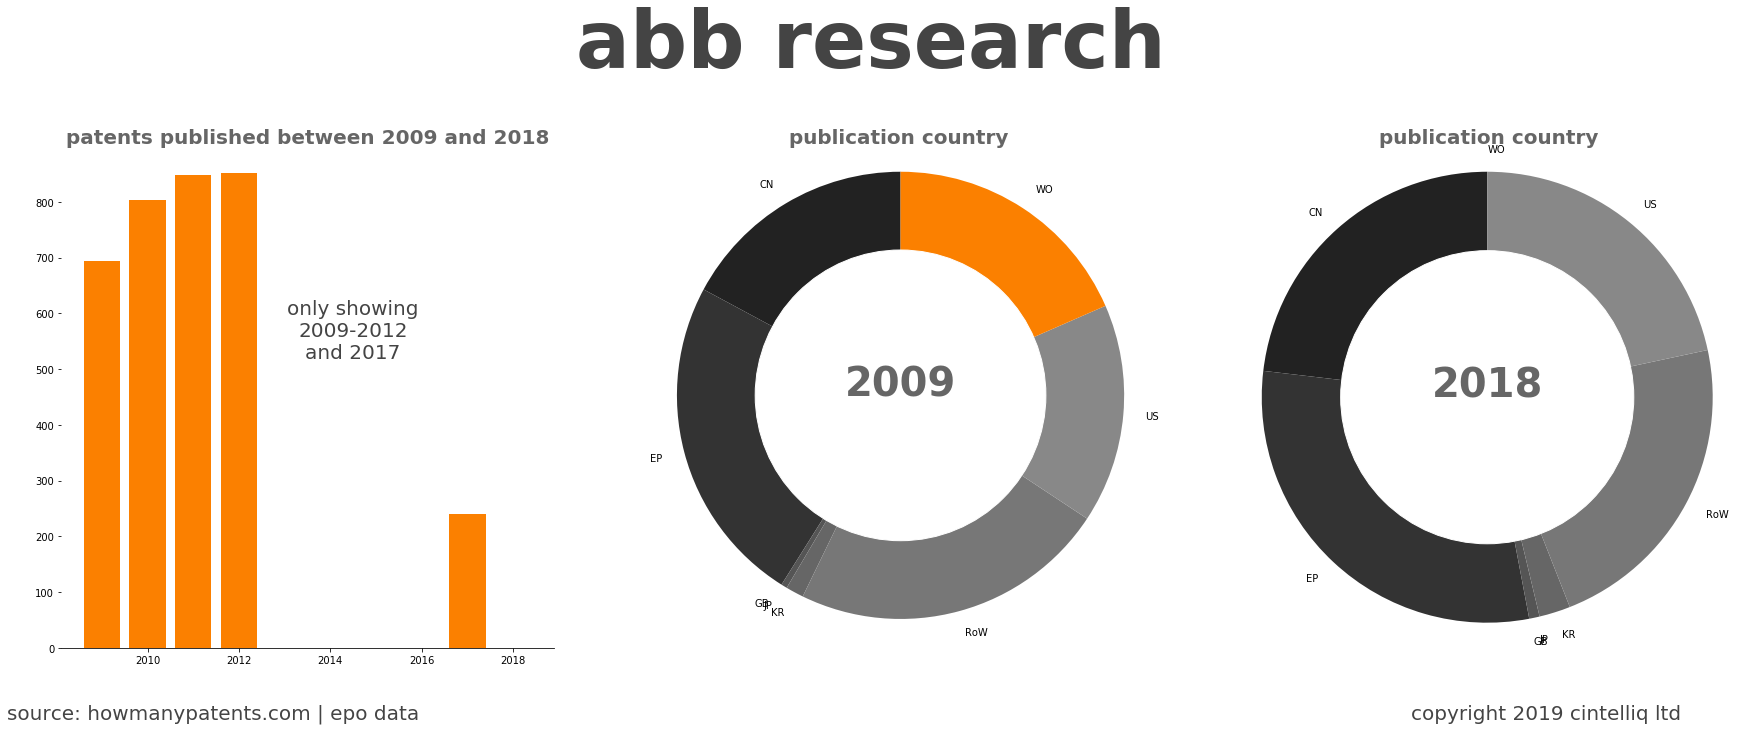 summary of patents for Abb Research